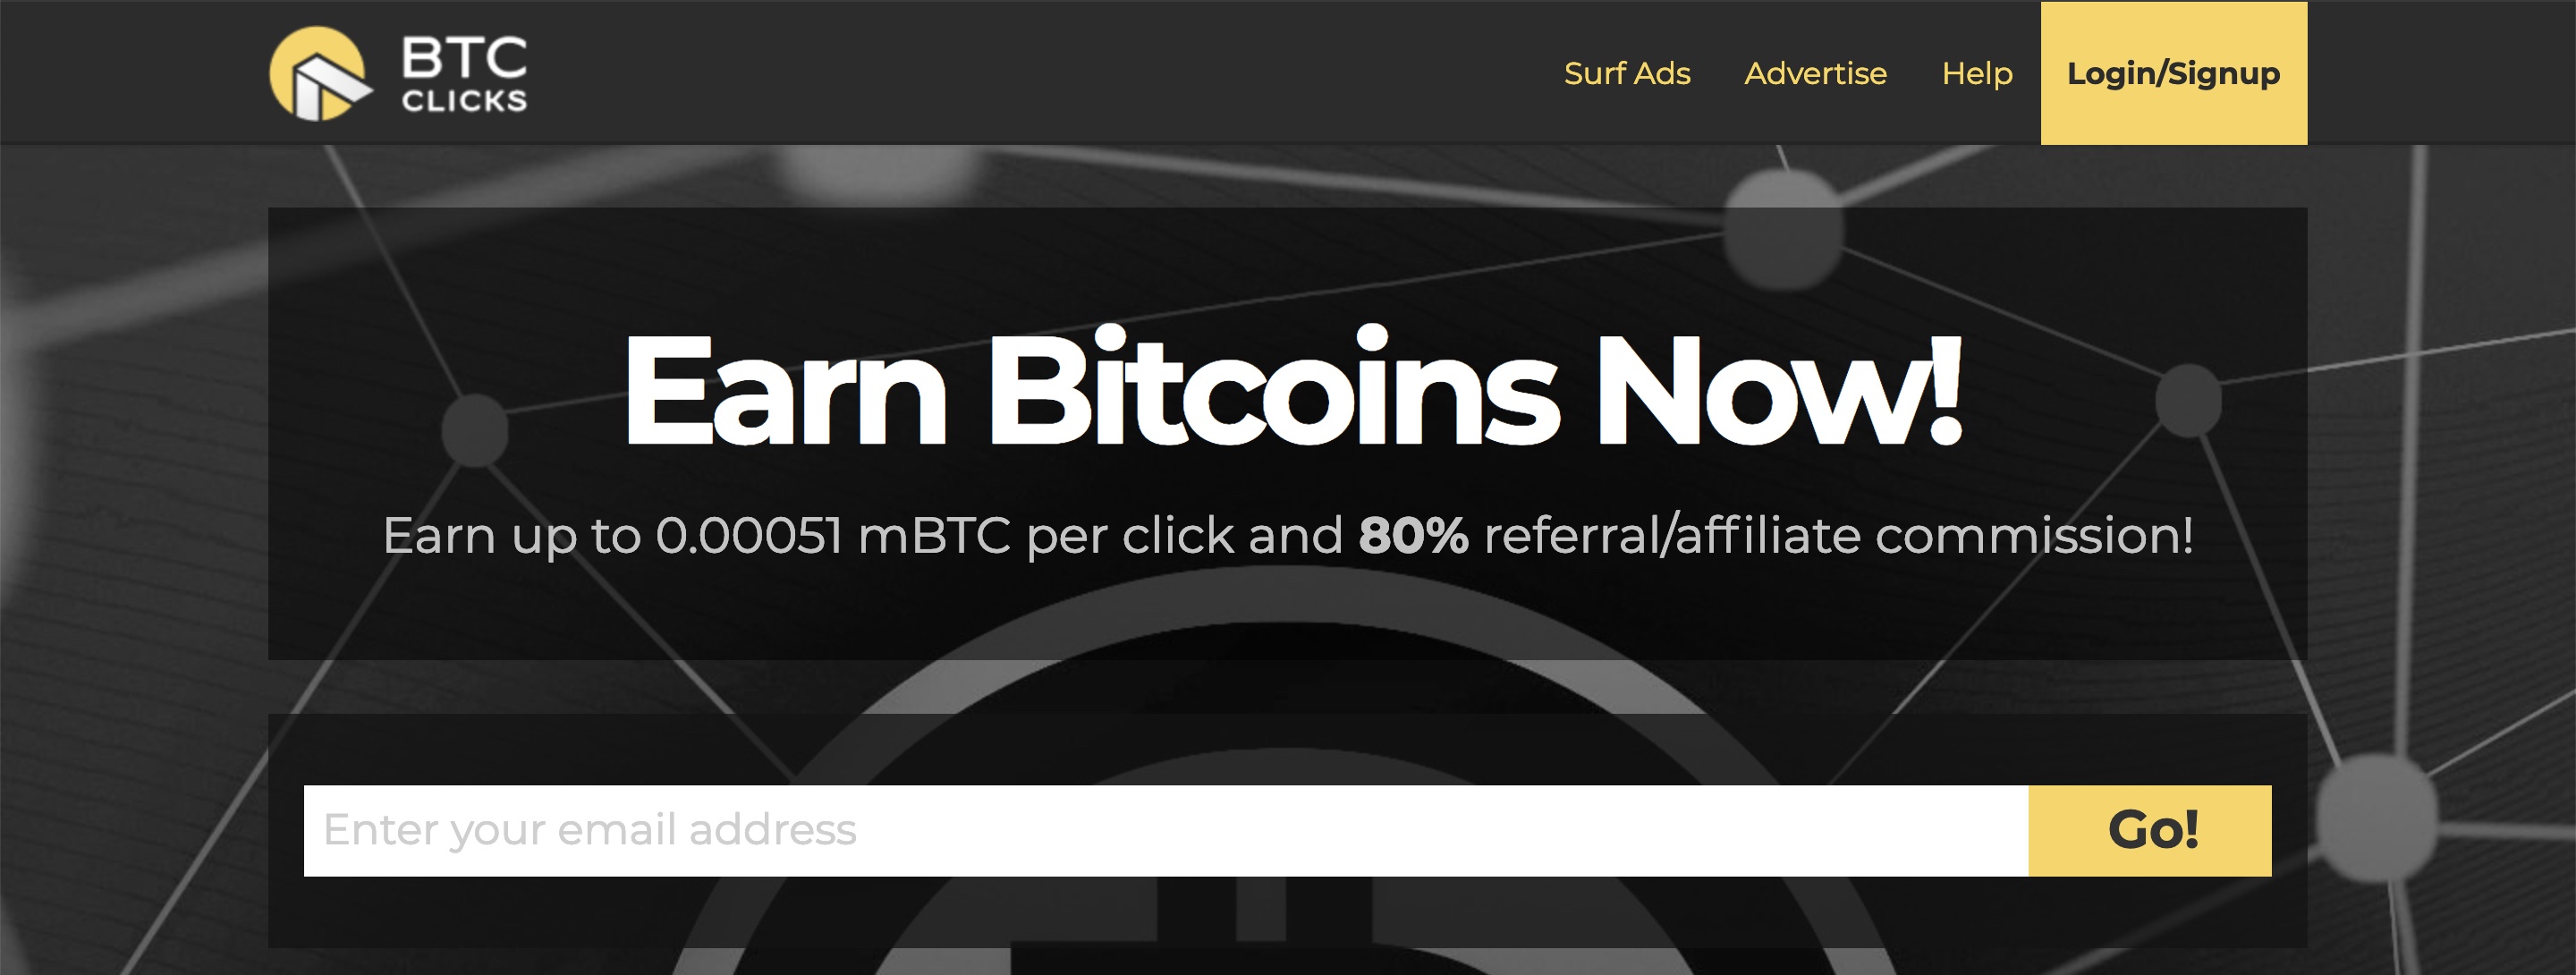 Earn bitcoin with click